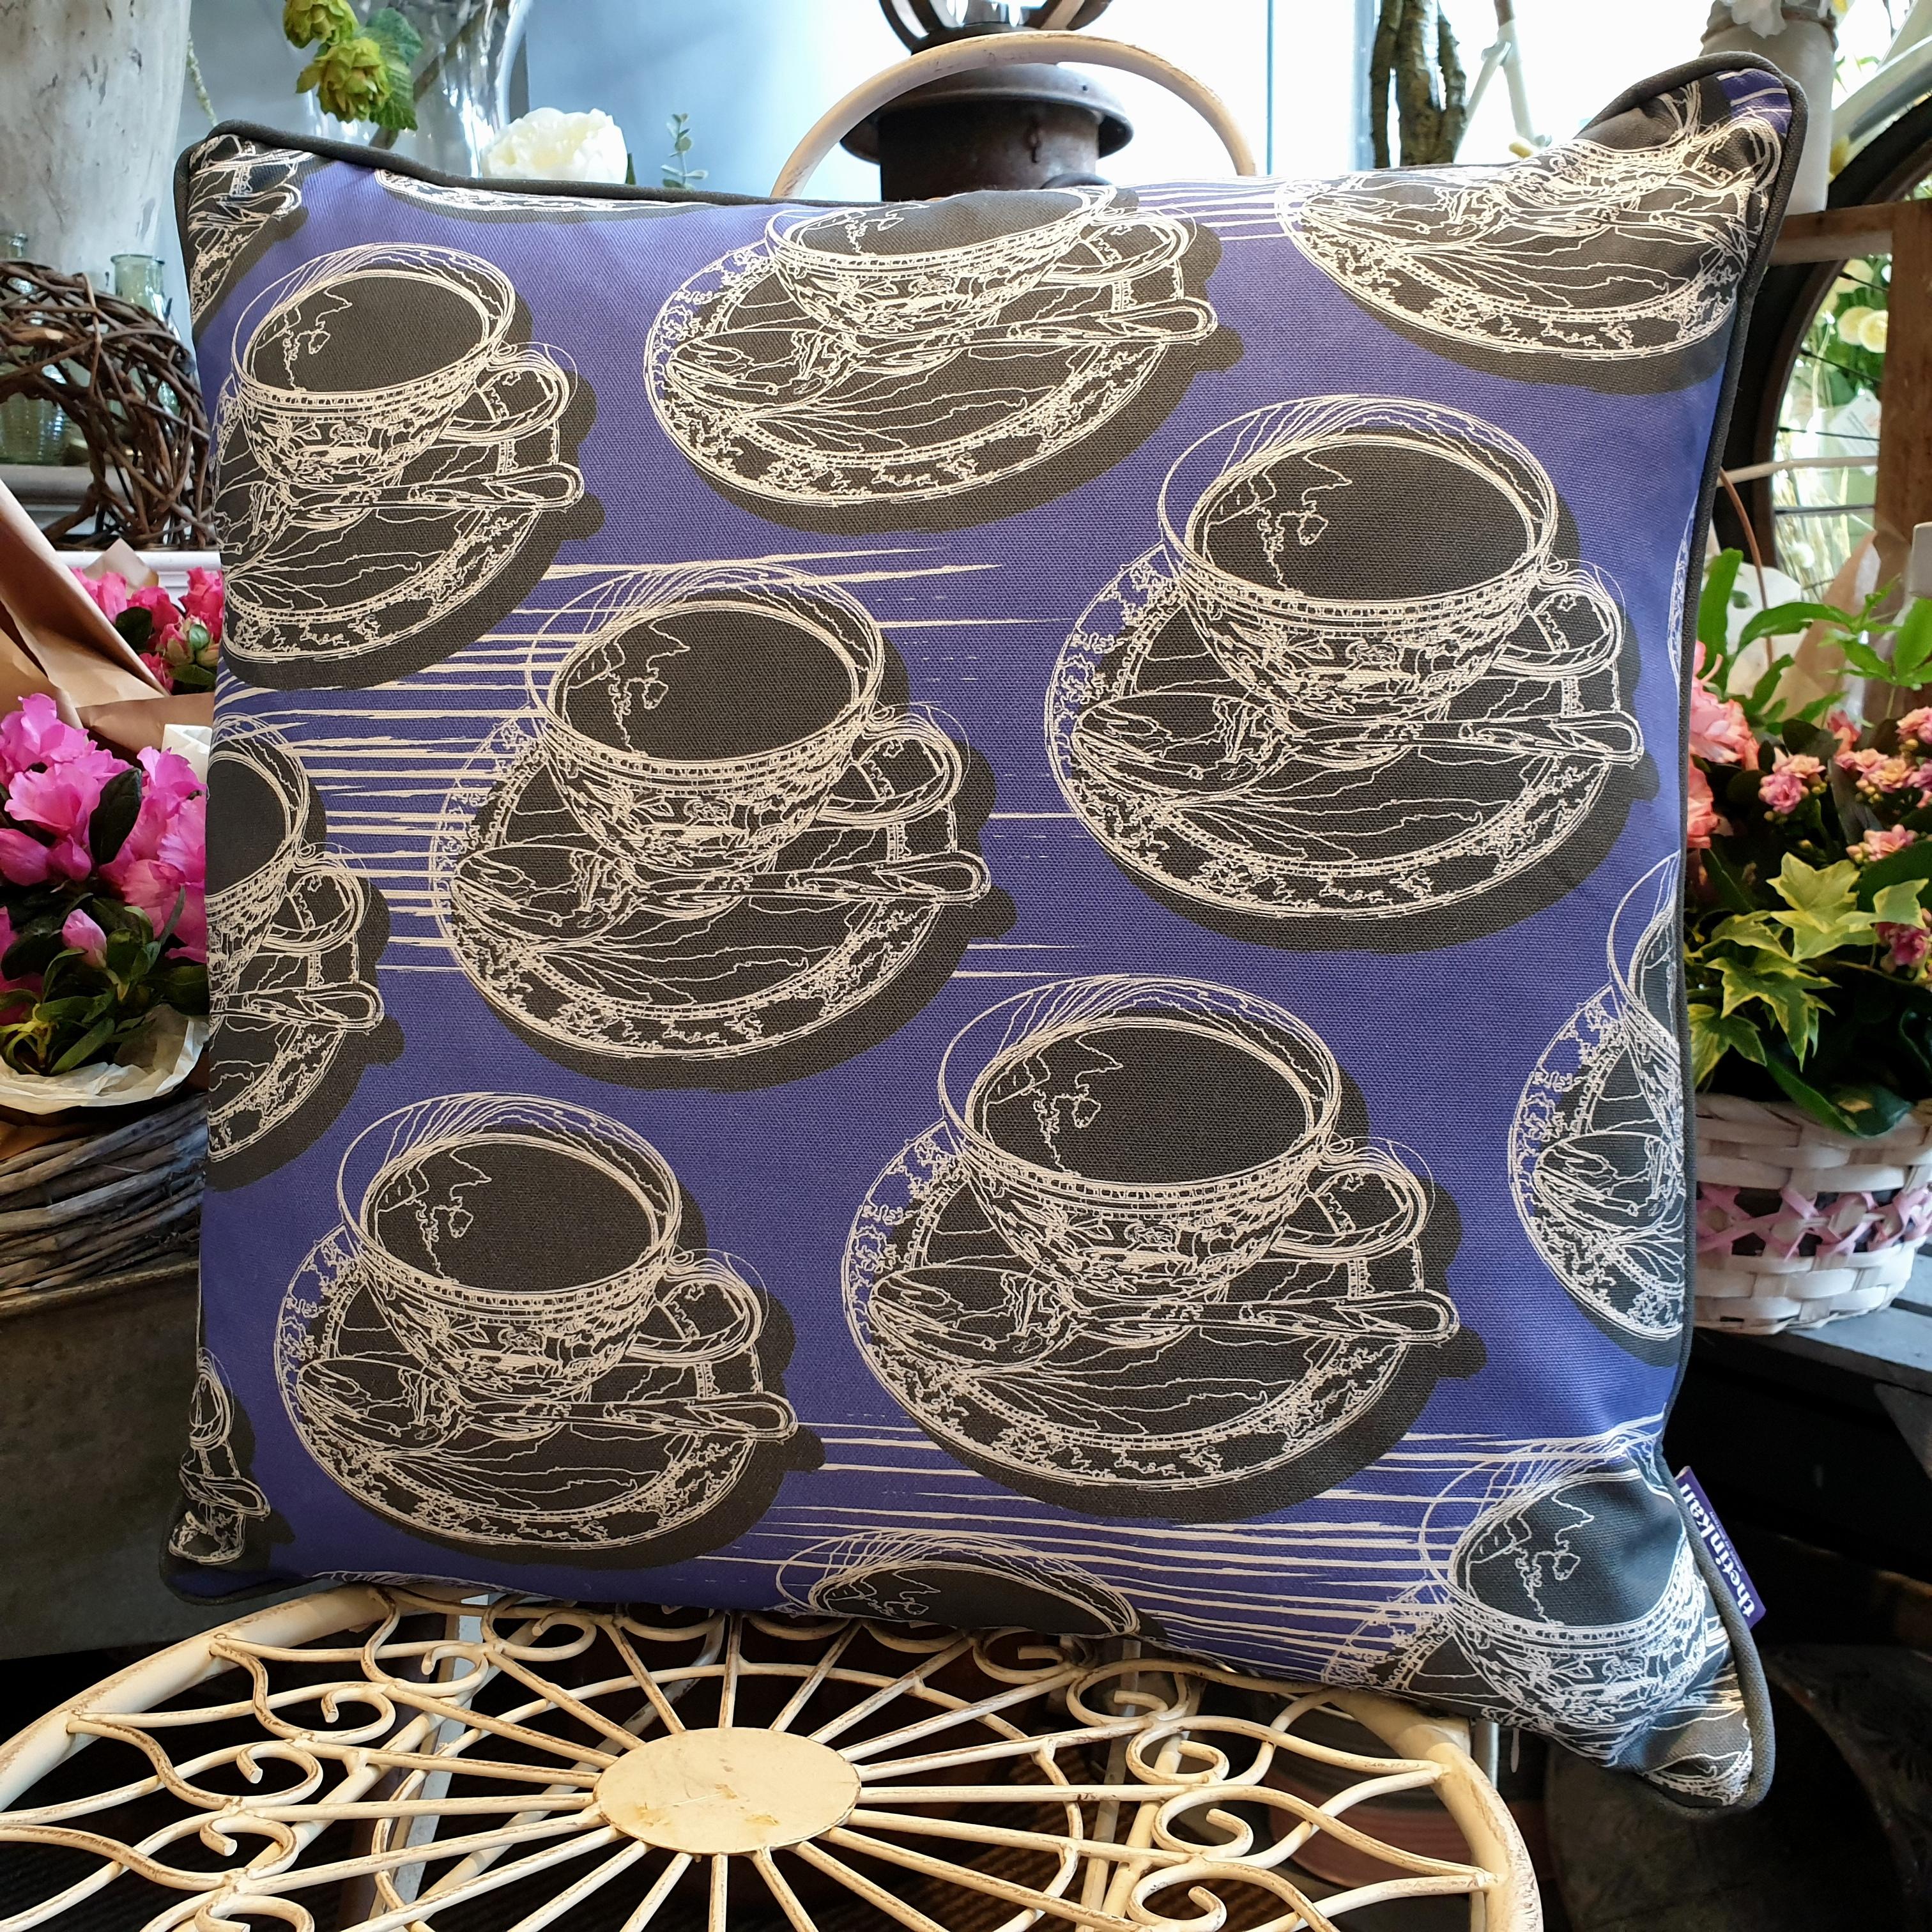 Double-sided violet purple 51cm square retro Afternoon Tea cushion with artistic white shards and grey handcrafted piping designed by thetinkan. White traced outline of multiple British teacups and saucers each colour filled in charcoal grey. Available with an optional luxury cushion inner pad. VIEW PRODUCT >>